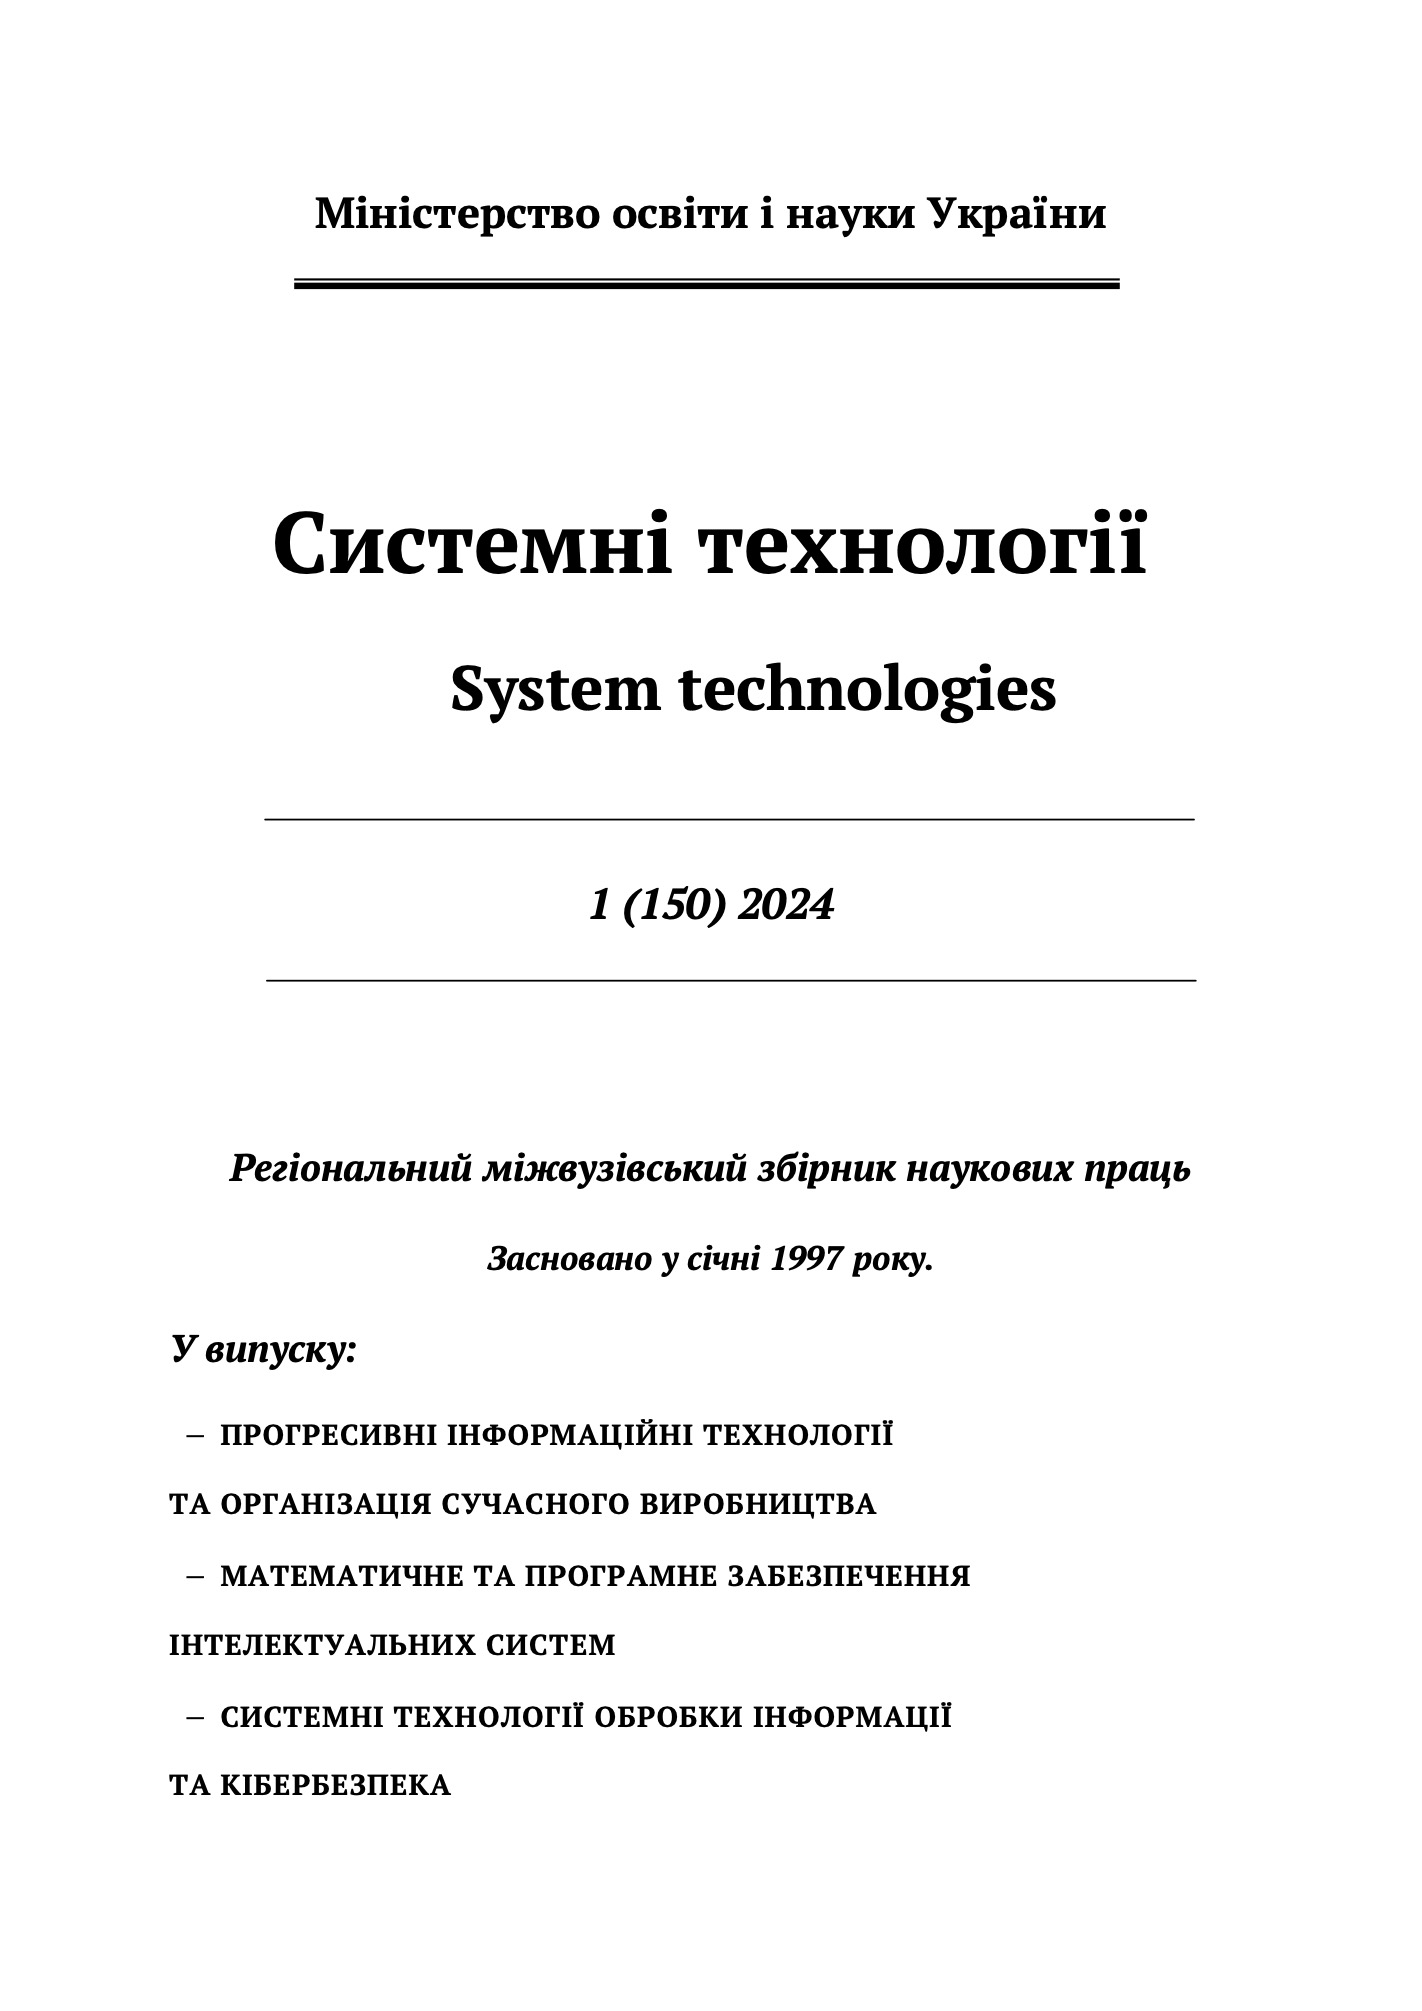 					View Vol. 1 No. 150 (2024): System technologies
				